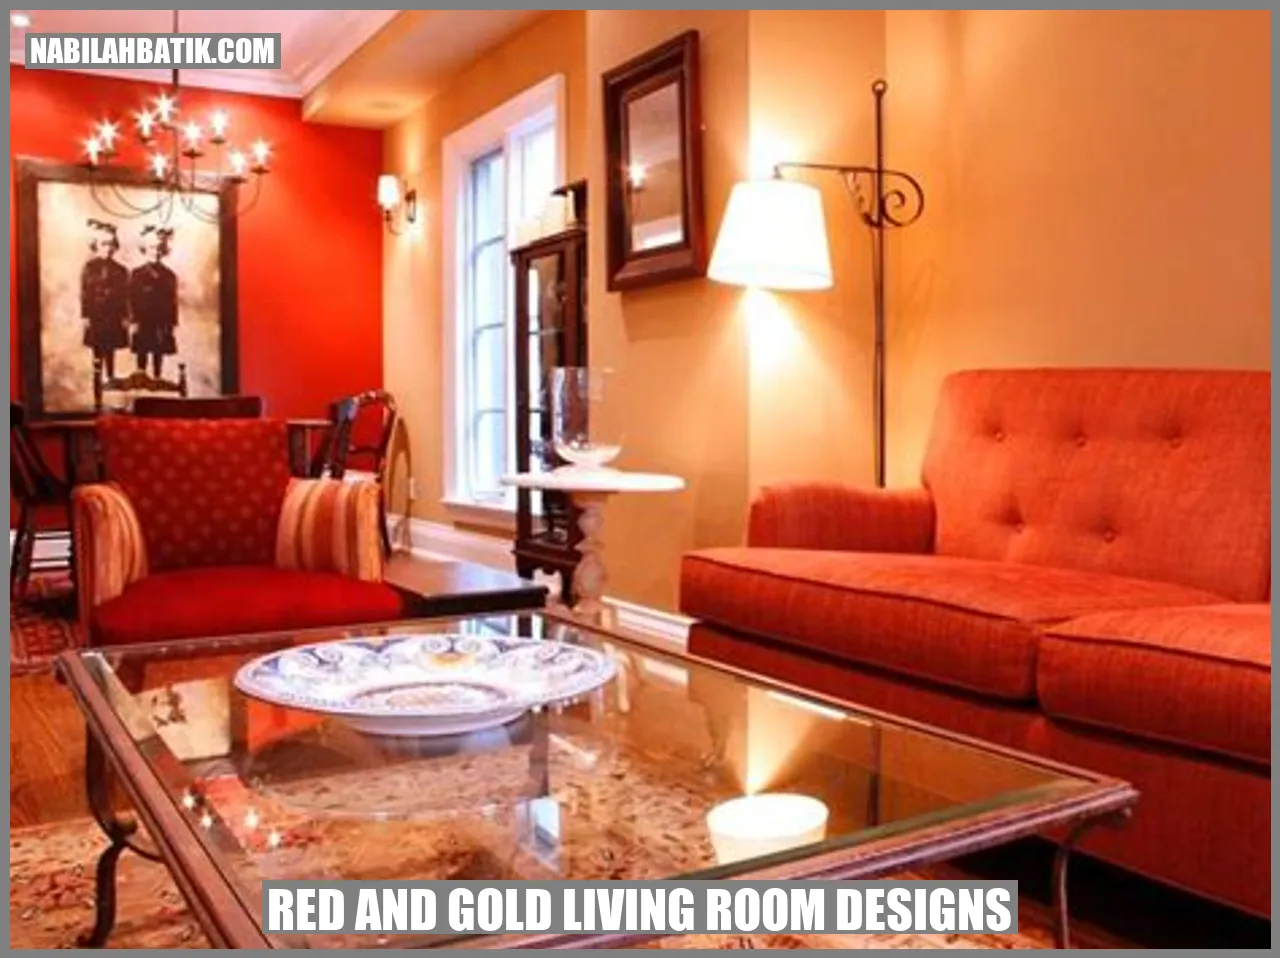 Red and Gold Living Room Designs